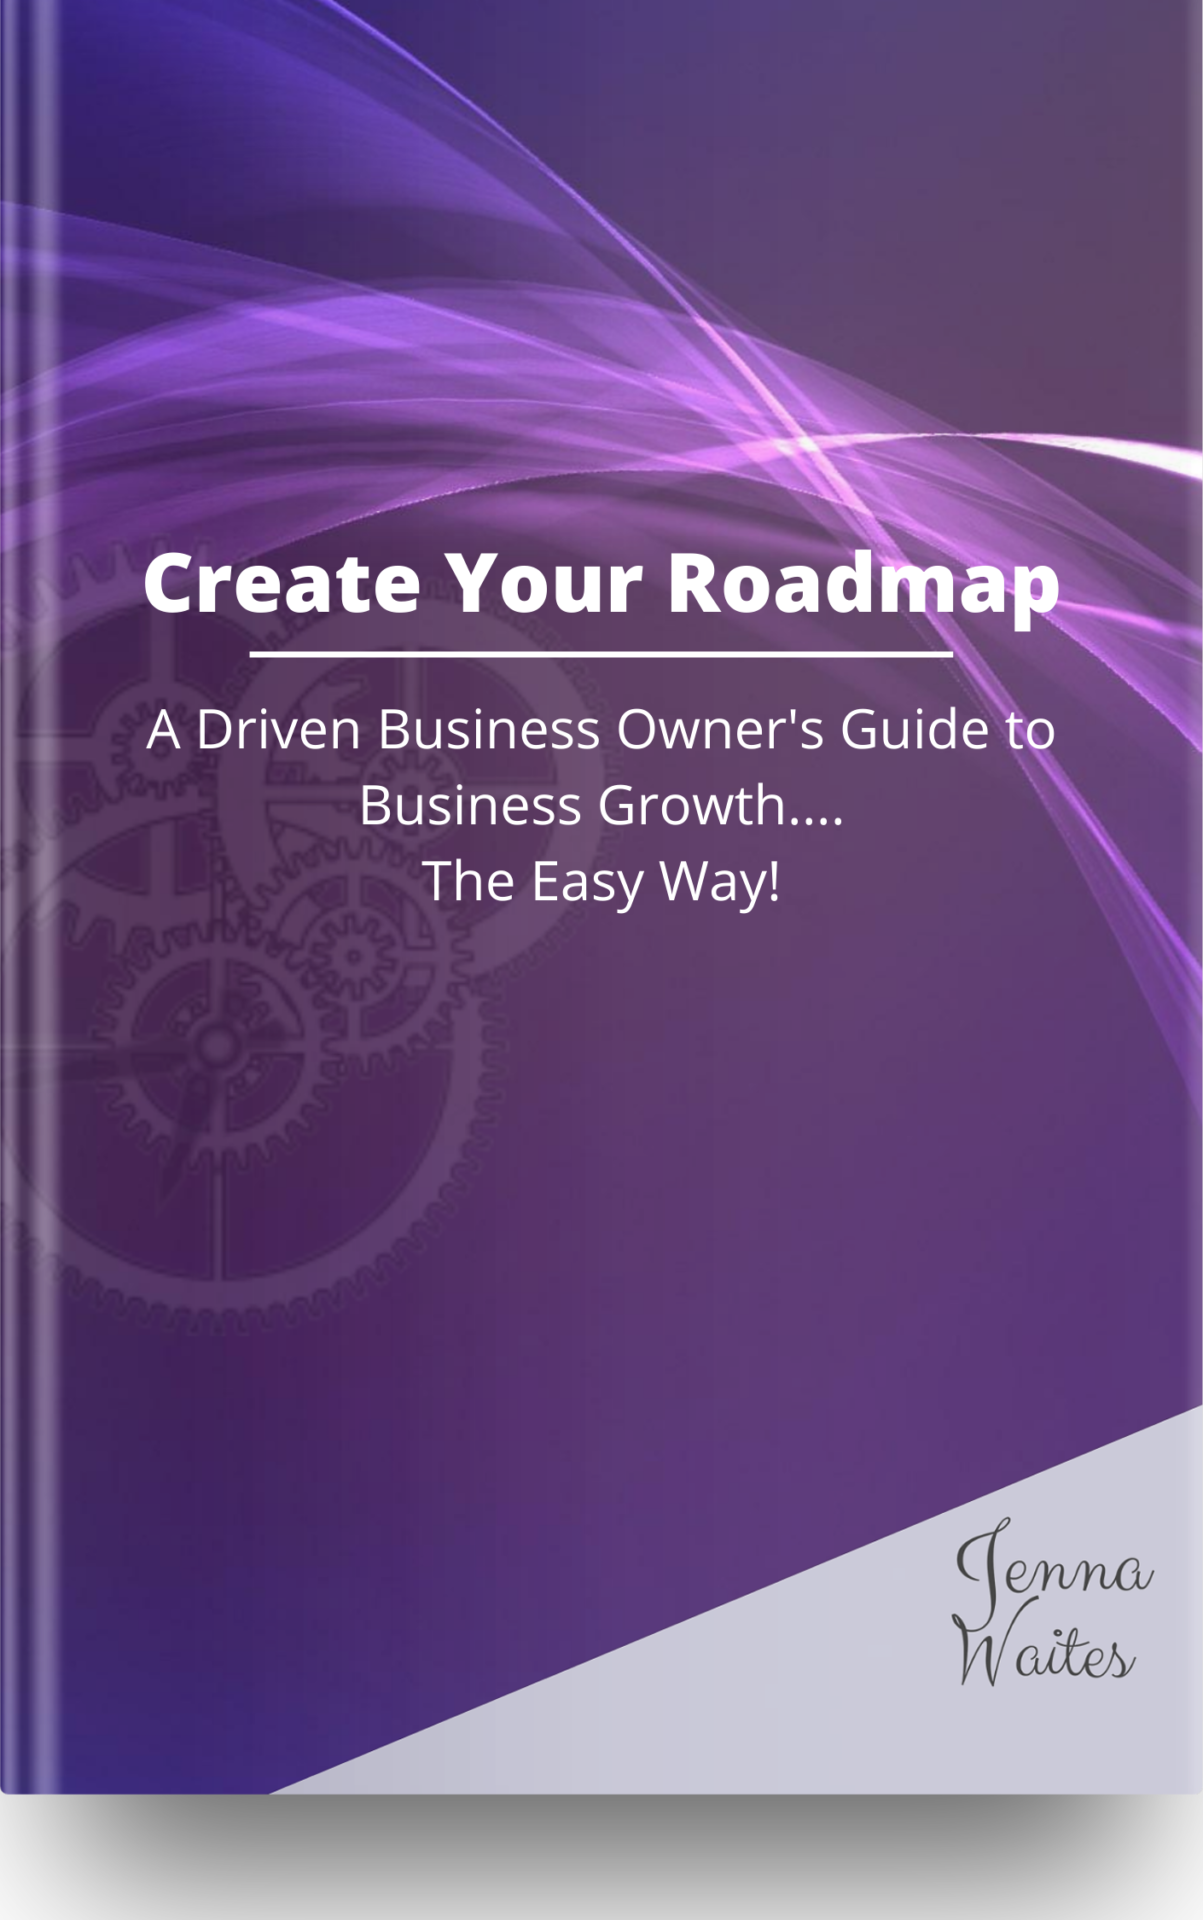 Create Your Roadmap for Business Growth